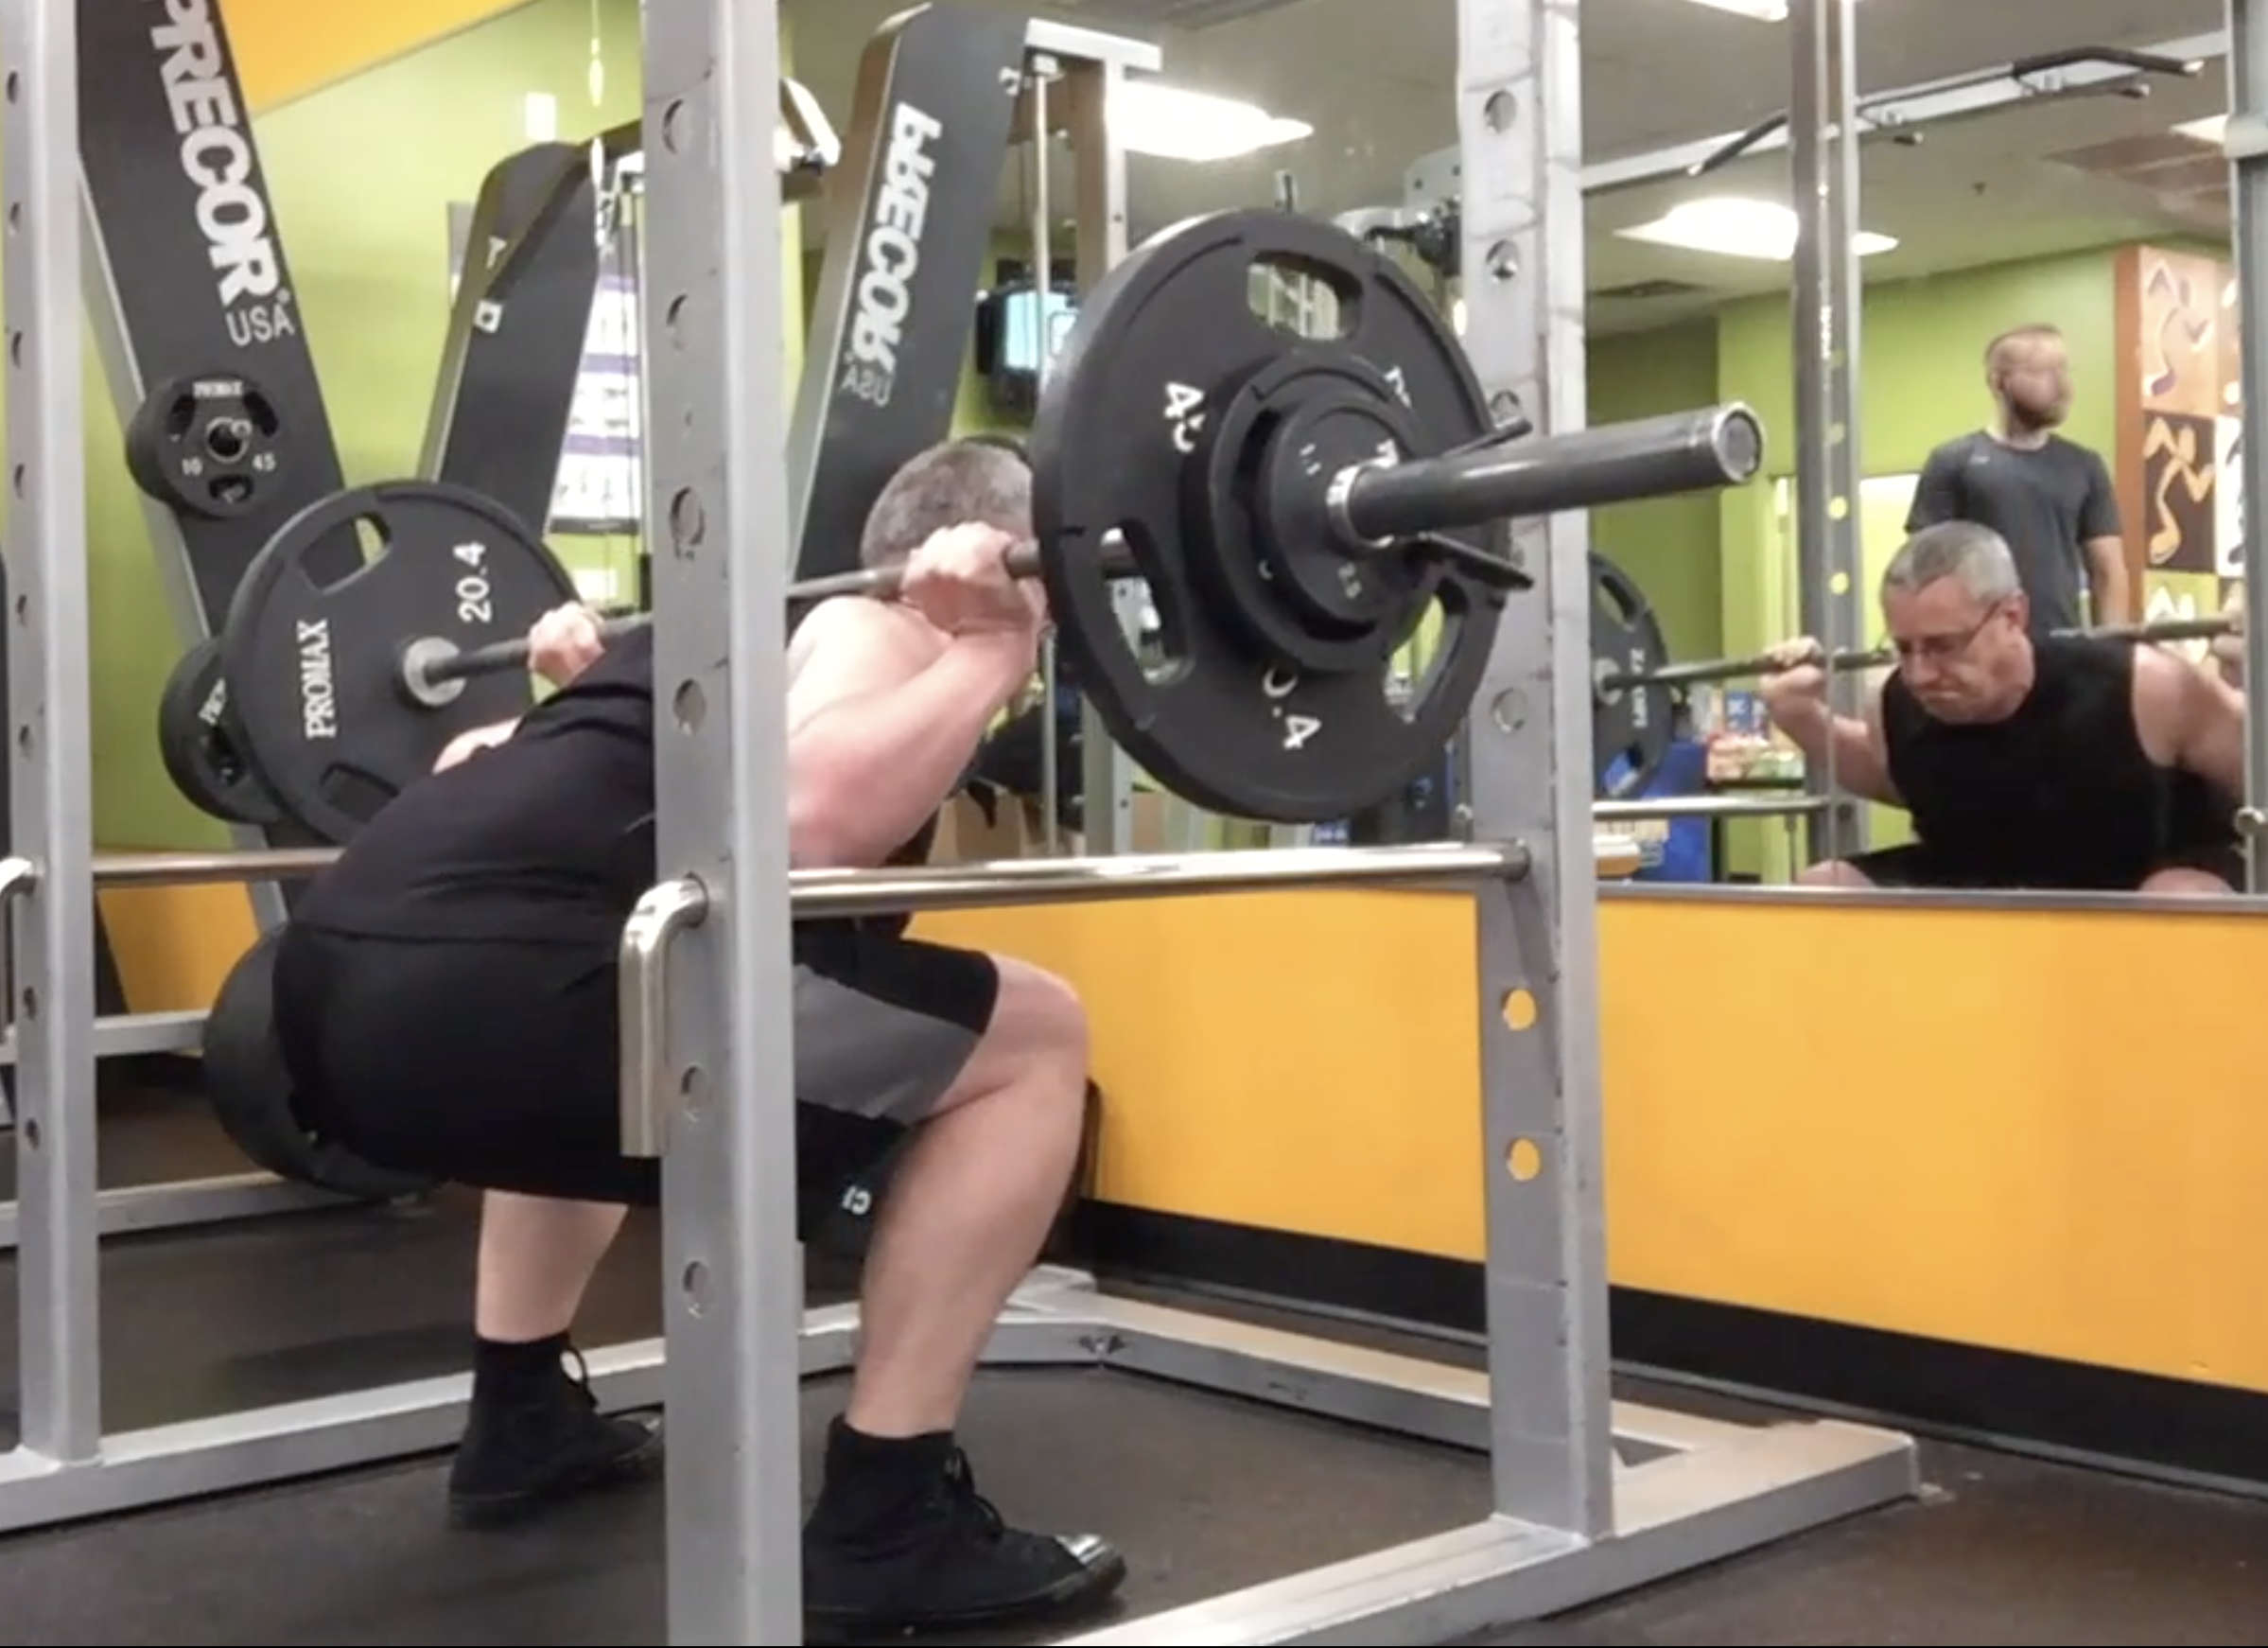 Doing Squats After 50 – Can a 50 year old learn to squat?